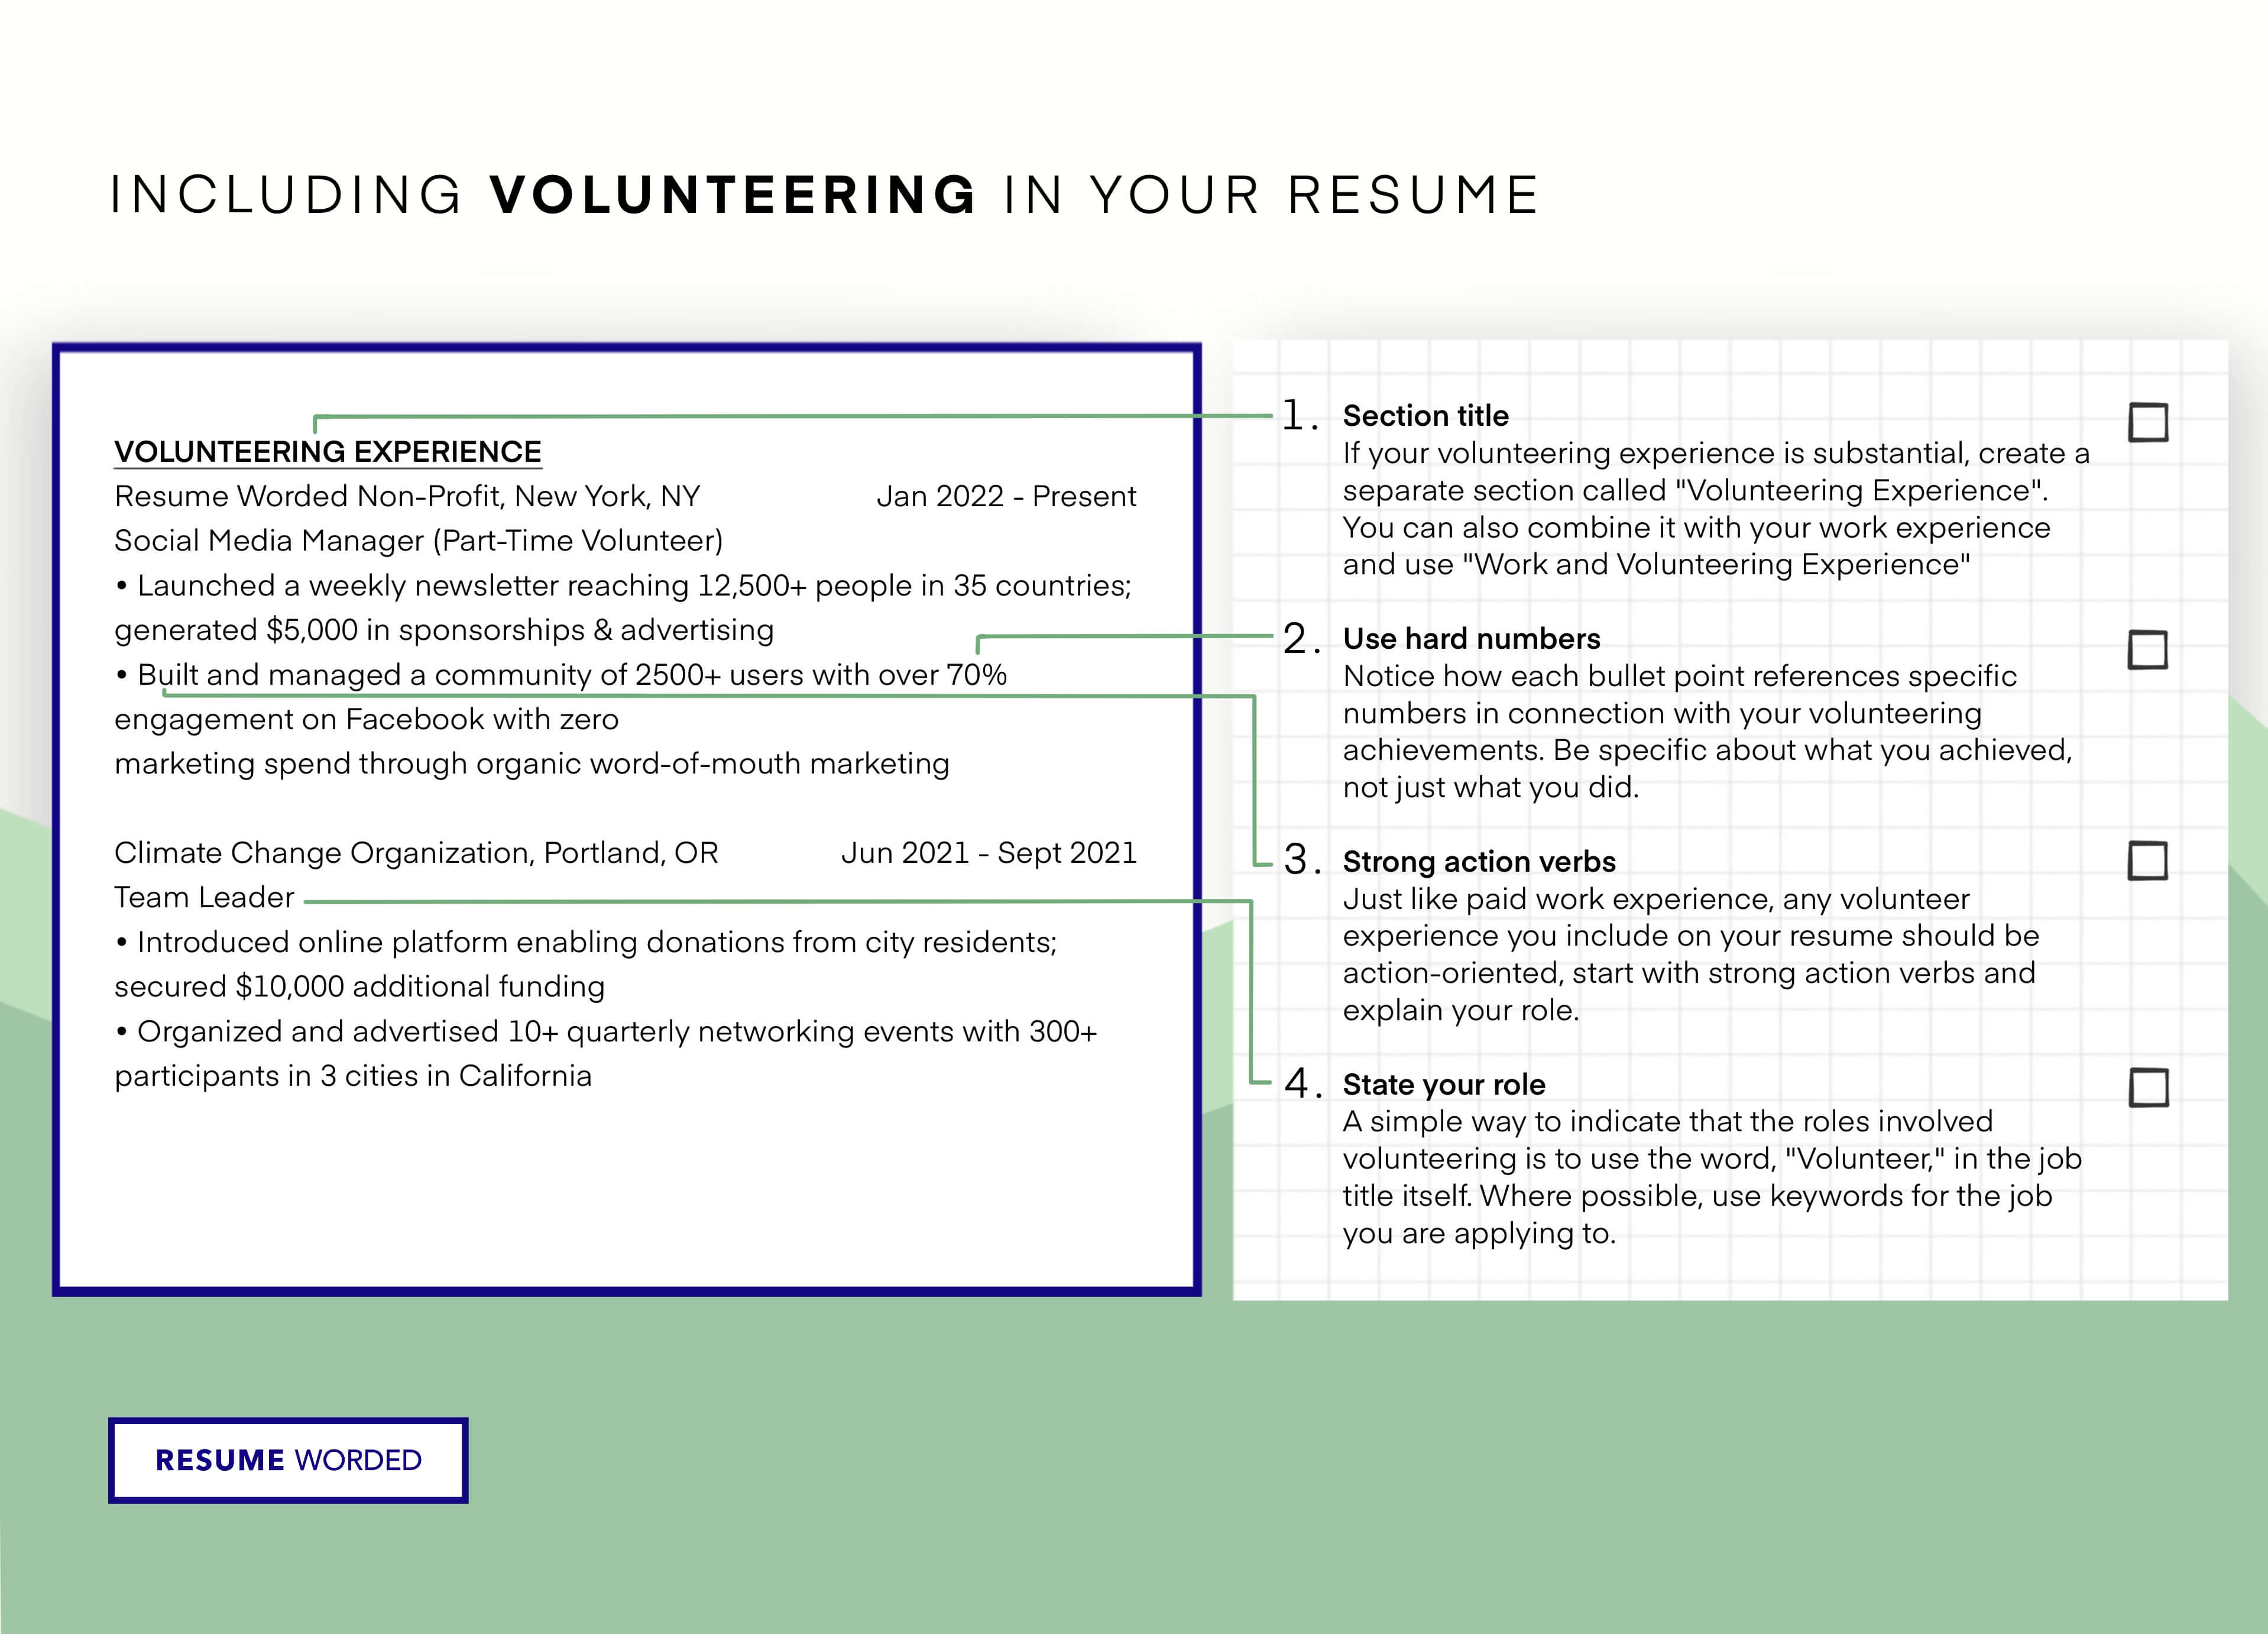 How to include volunteer experience on a resume